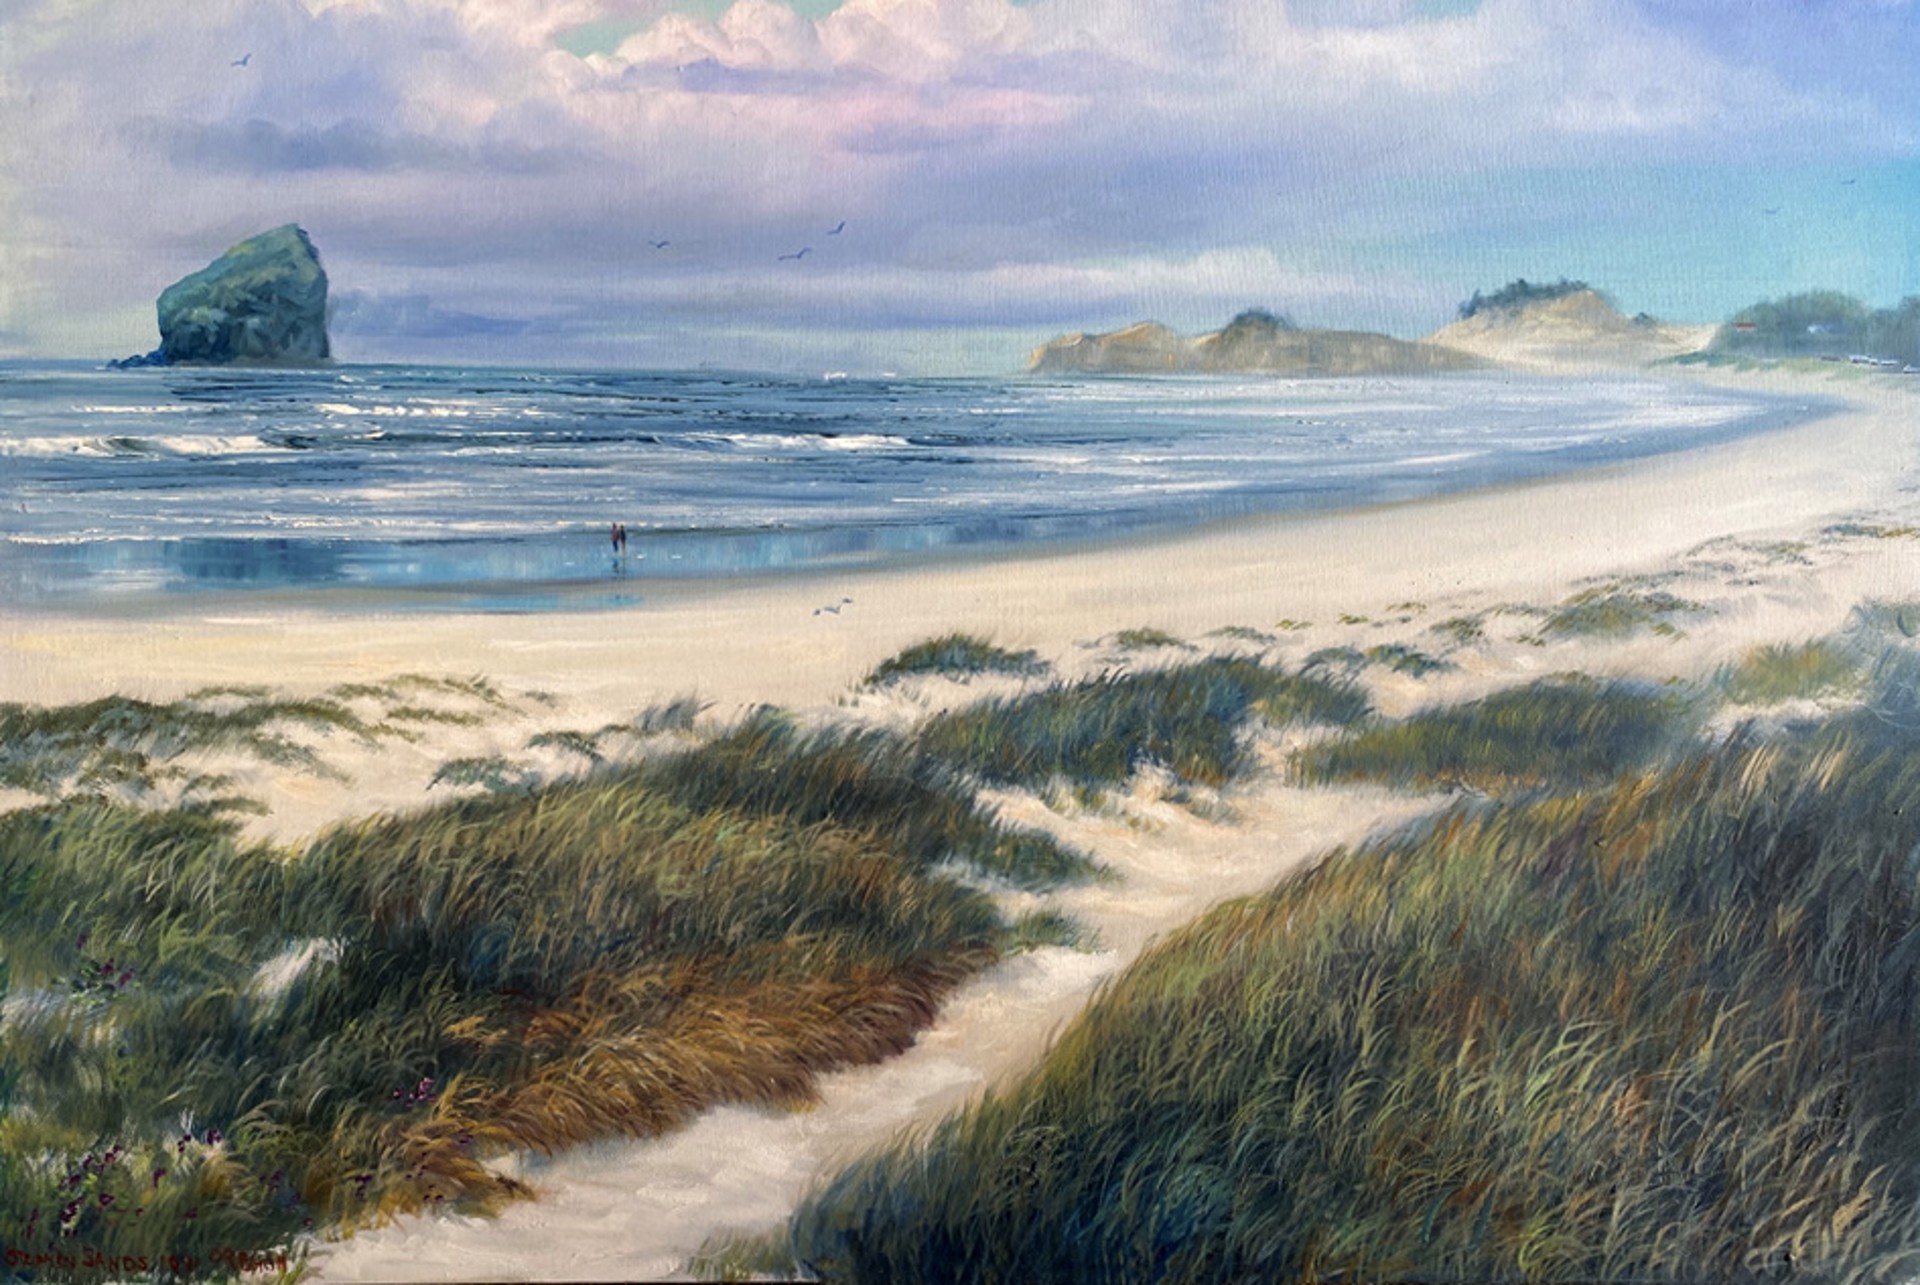 Pacific City Beach, Oregon by Stephen Sands